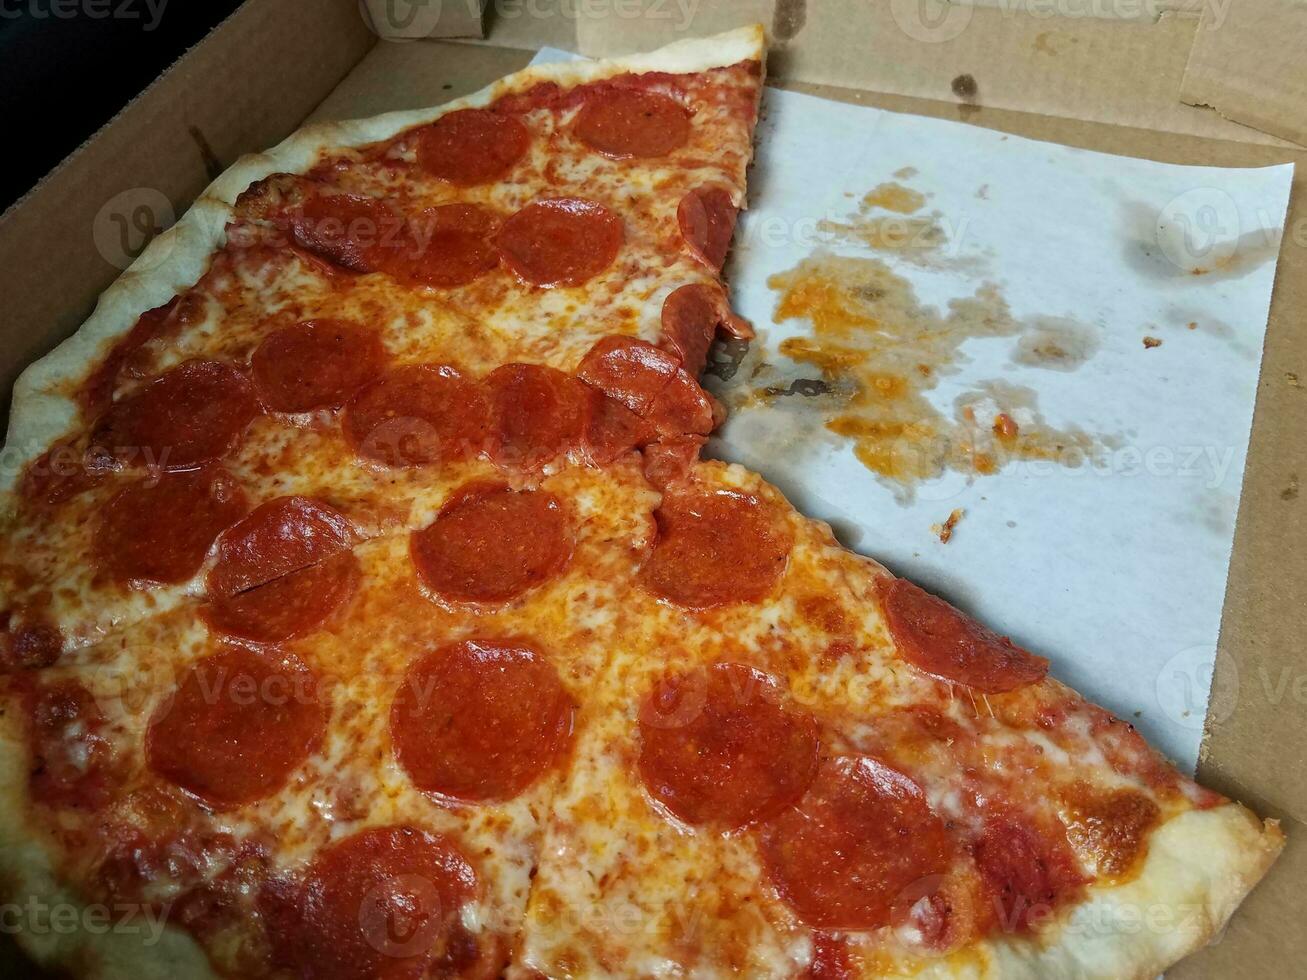 greasy pepperoni and cheese pizza in cardboard box photo